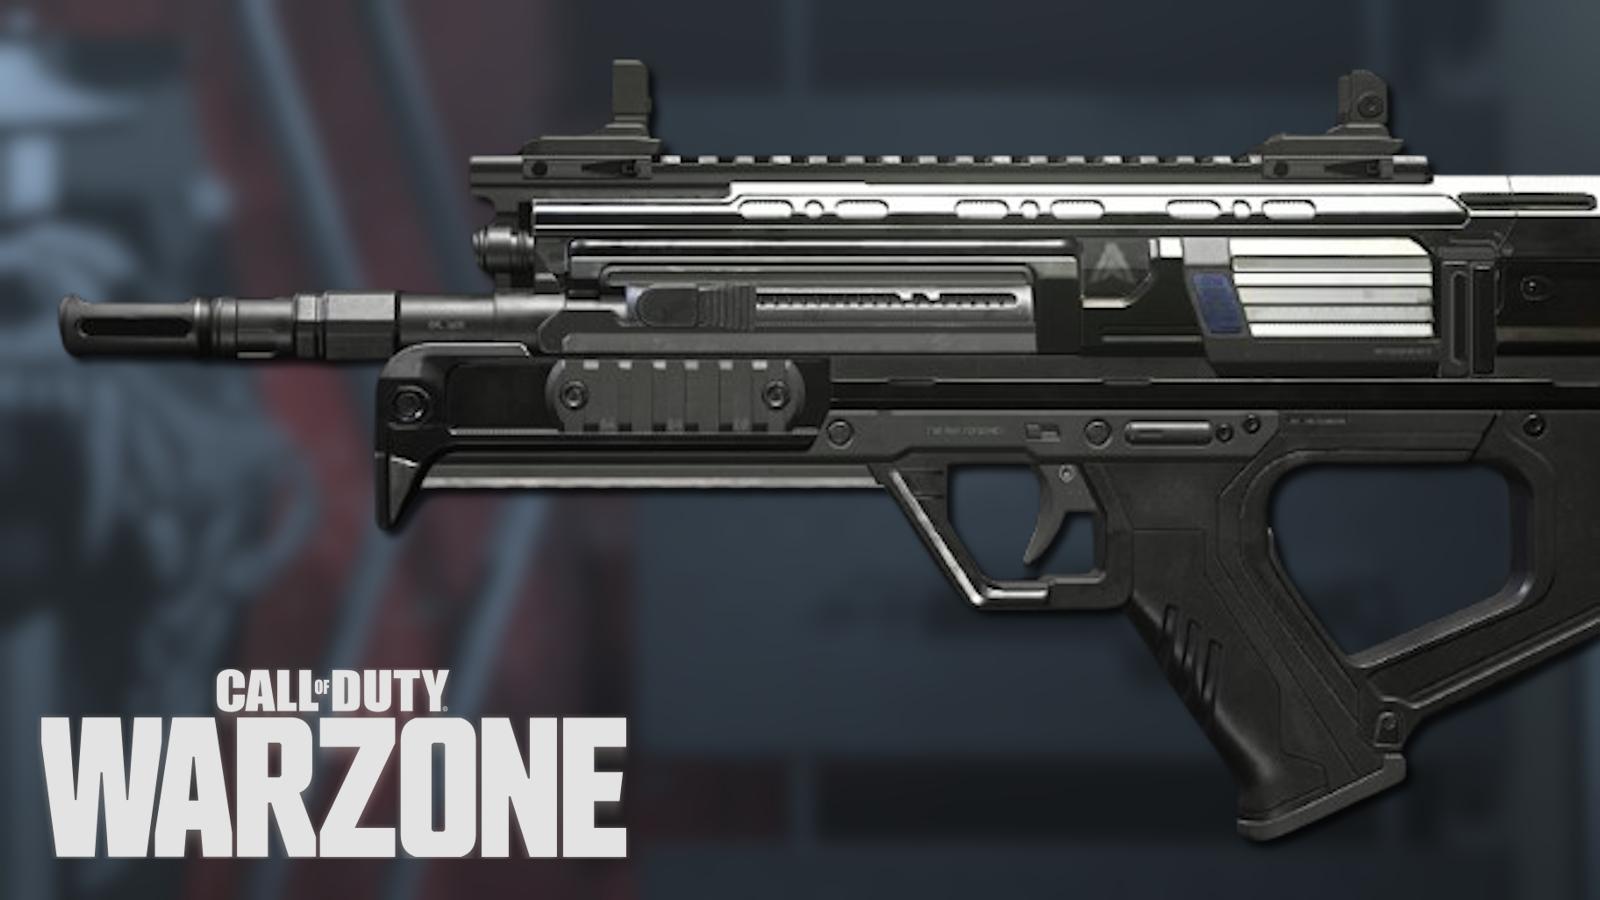 BAL-27 assault rifle in Warzone.